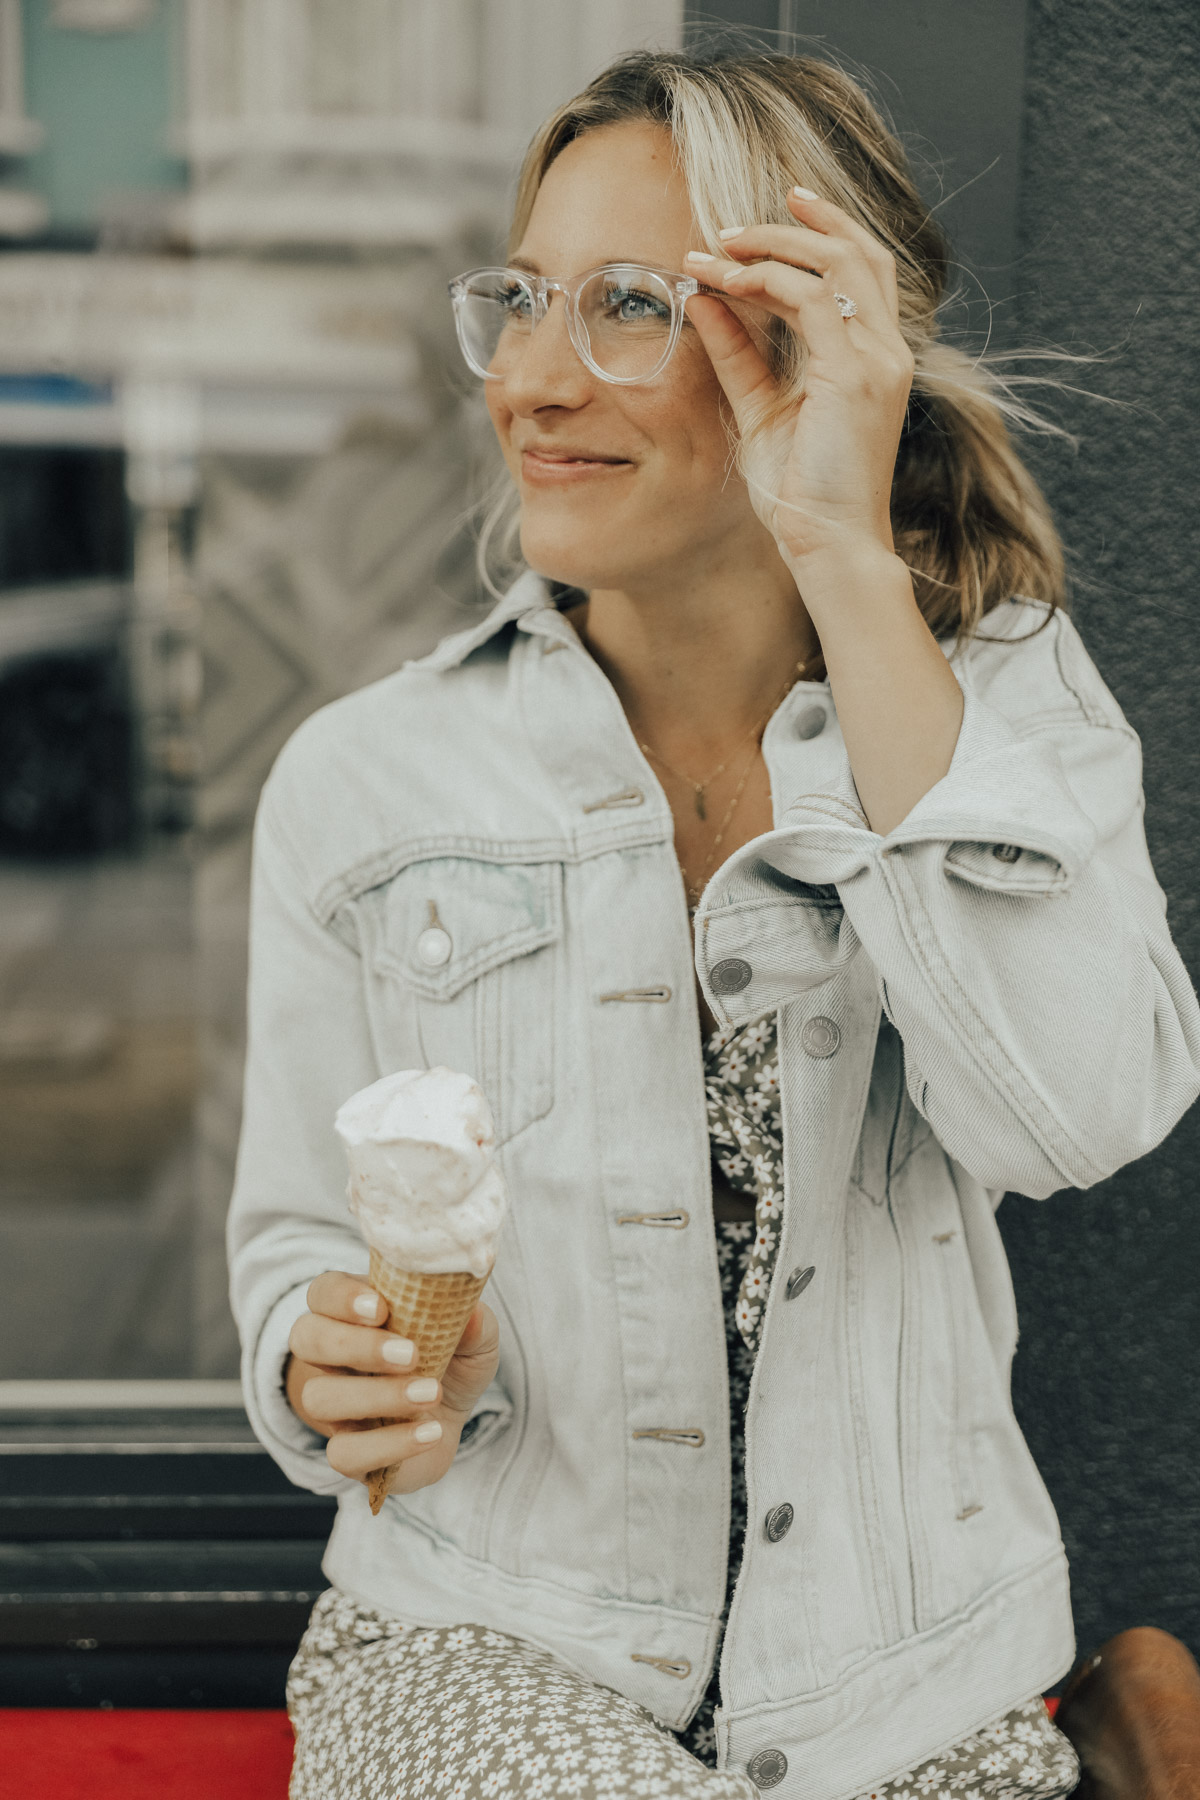 2 Ways to Use Eyeglasses to Change Up Your Look – Advice from a Twenty ...